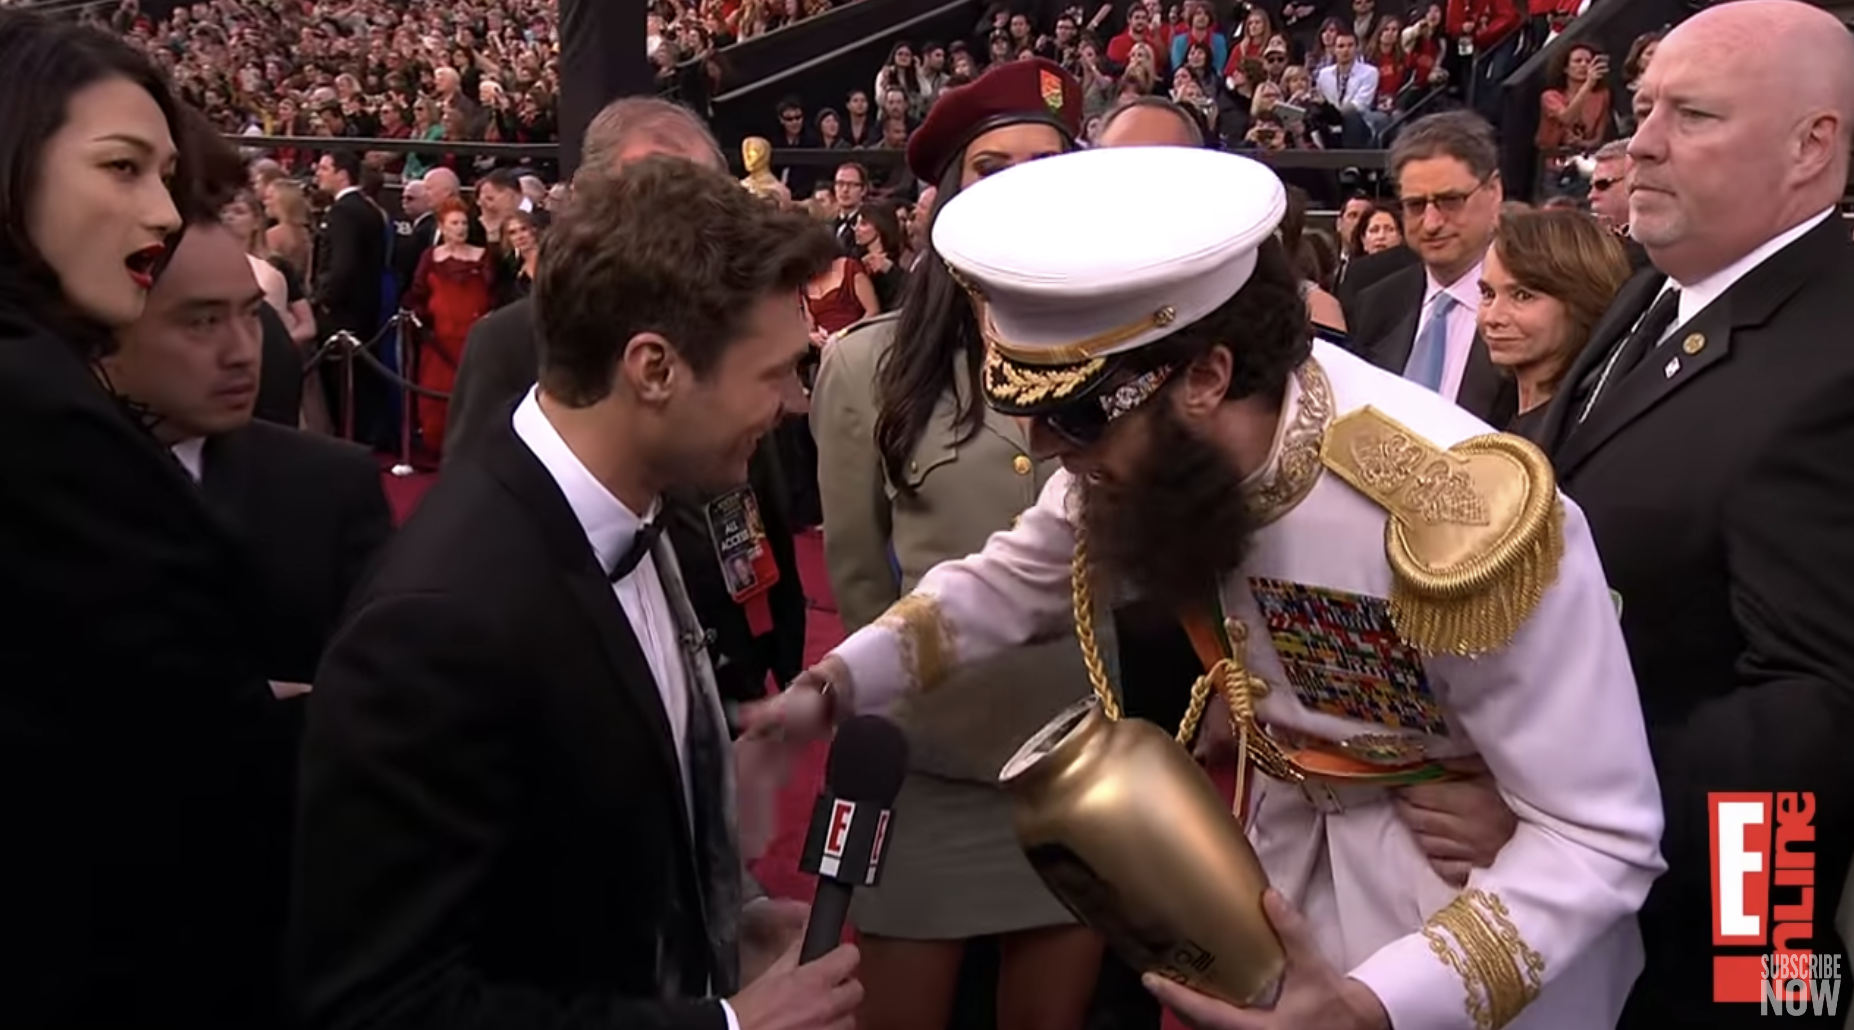 Sacha Baron Cohen, dressed in a white military uniform and holding an open urn, is wiping his hand on the front of Ryan Seacrest&#x27;s suit who is holding a microphone